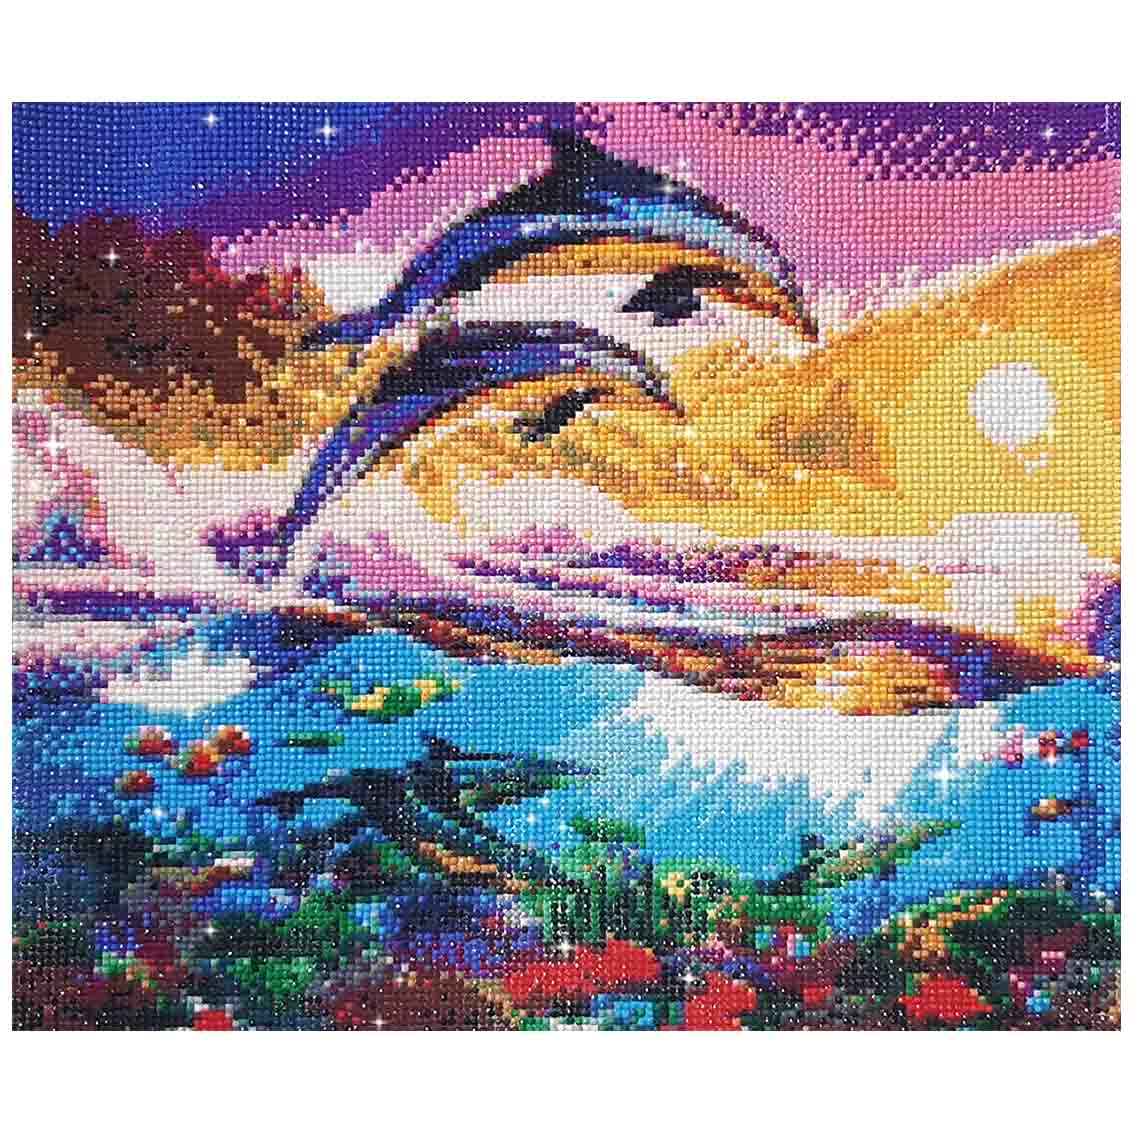 FINISHED DESIGN! SWIMMING DOLPHINS IN THE SEA 40*35cm